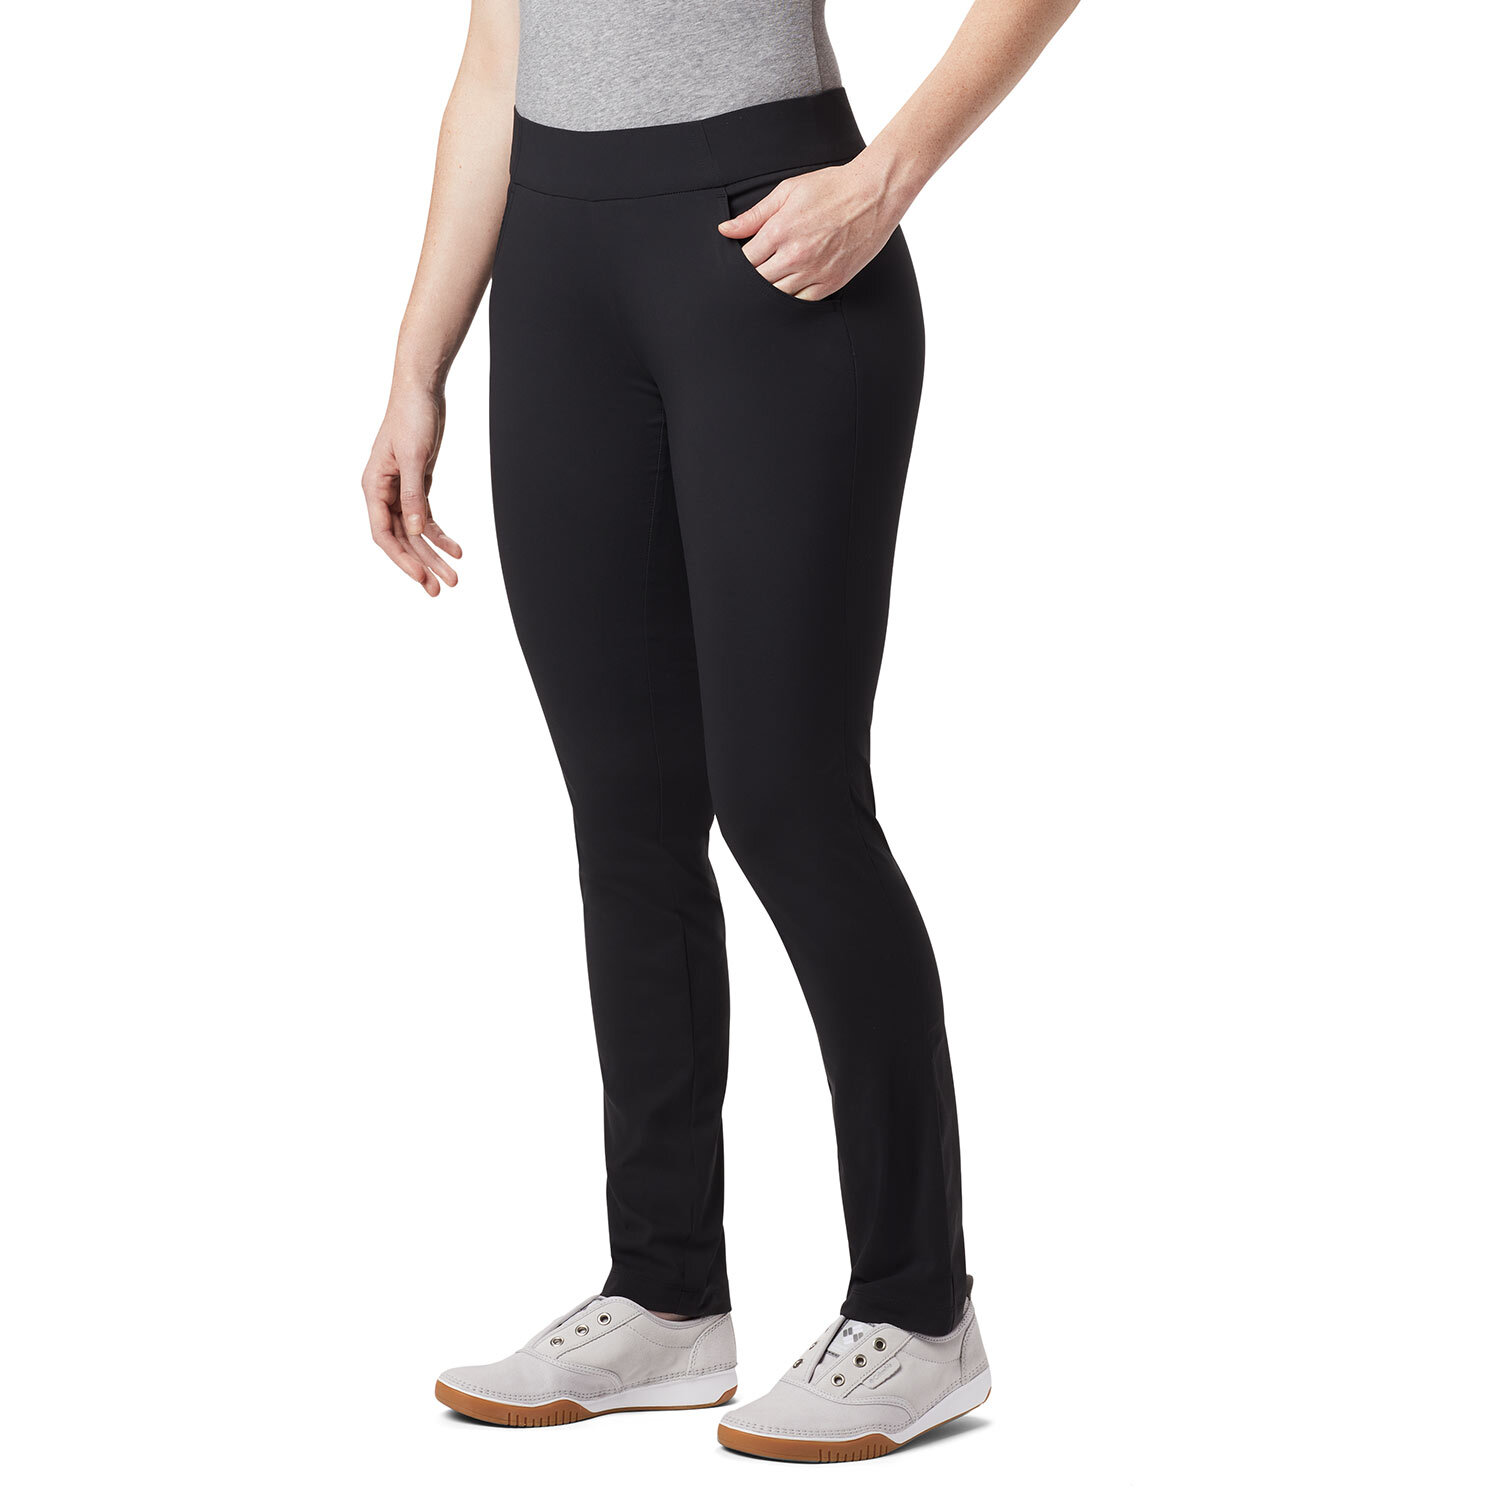 High waist winter leggings with back pocket and reflectors - RAVEN